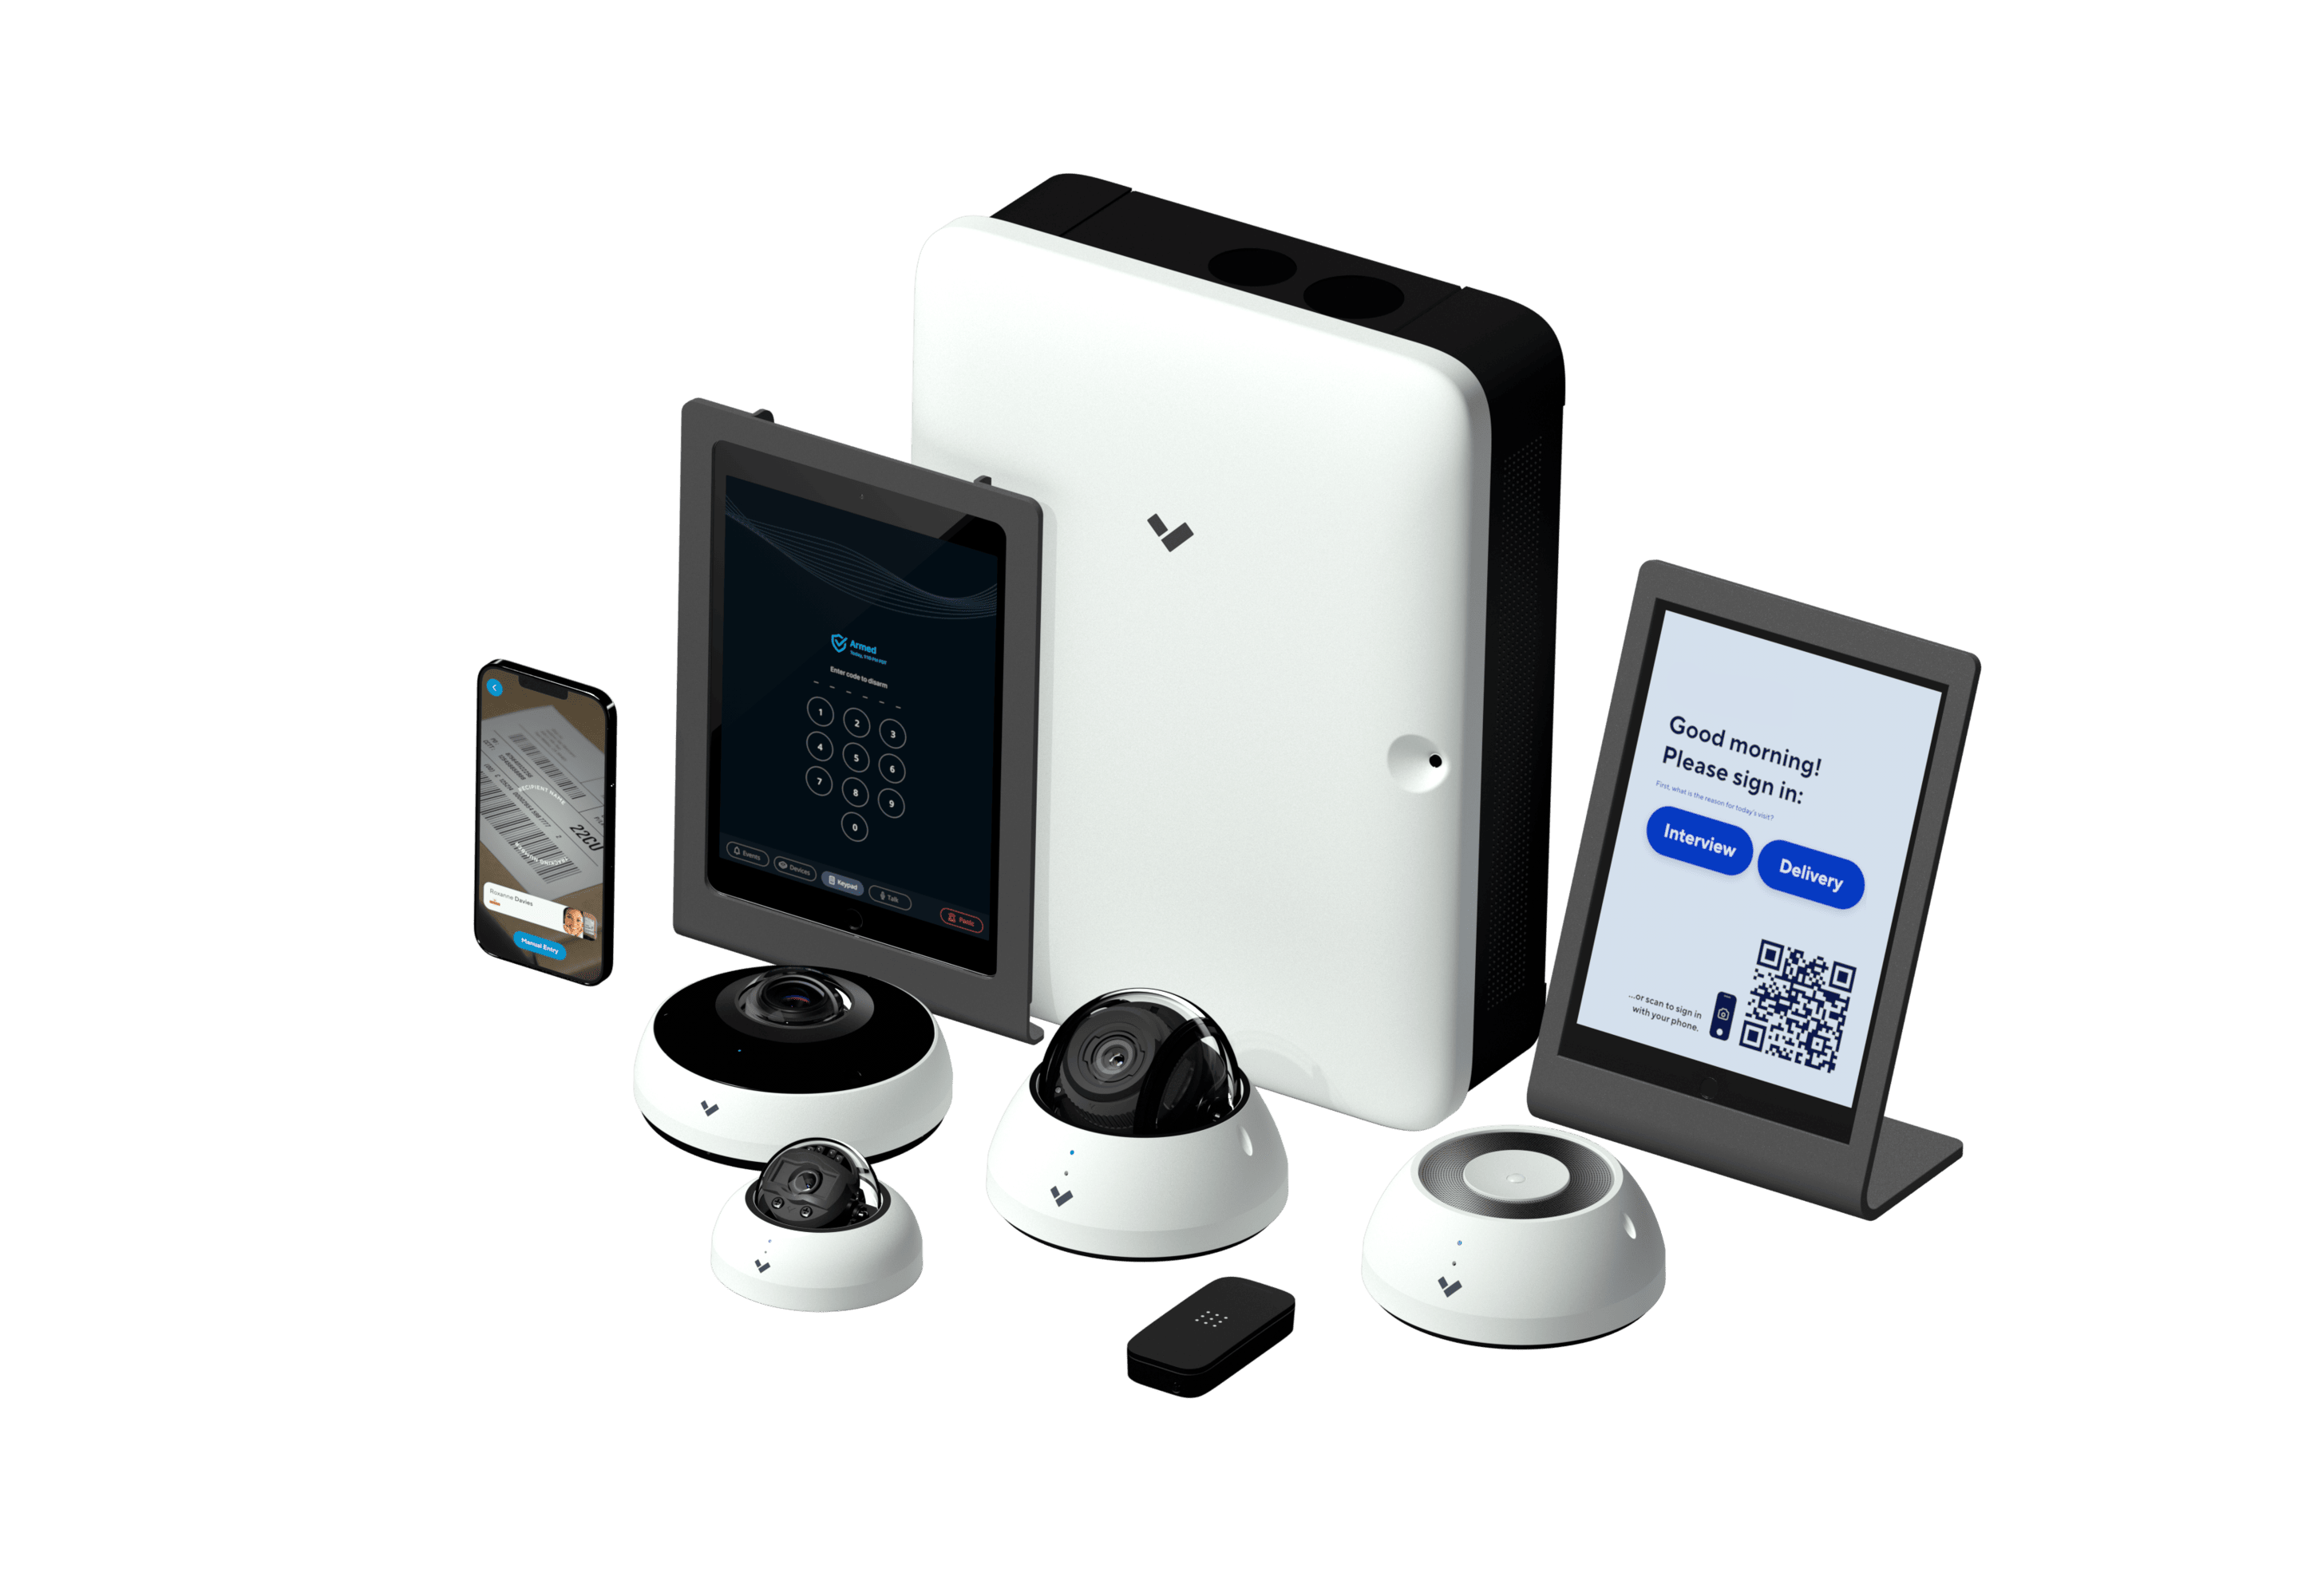 Verkada device family for security camera systems in Fort Worth